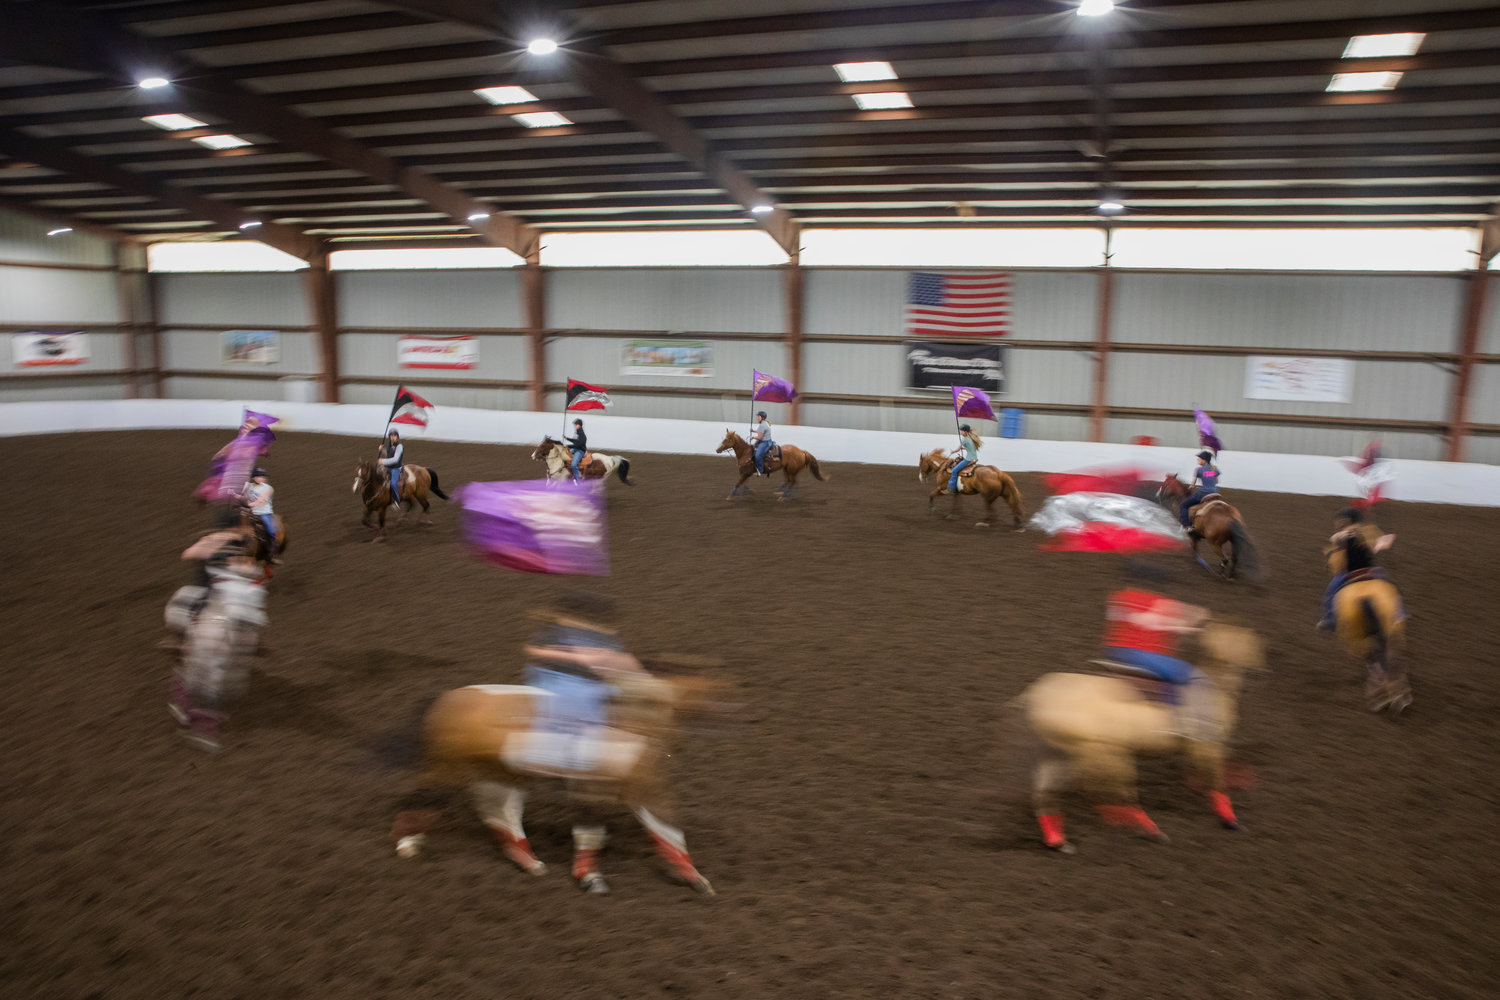 The W.F. West equestrian drill team runs through choreographed movements to music in Salkum’s Rocky Top Arena on Monday.